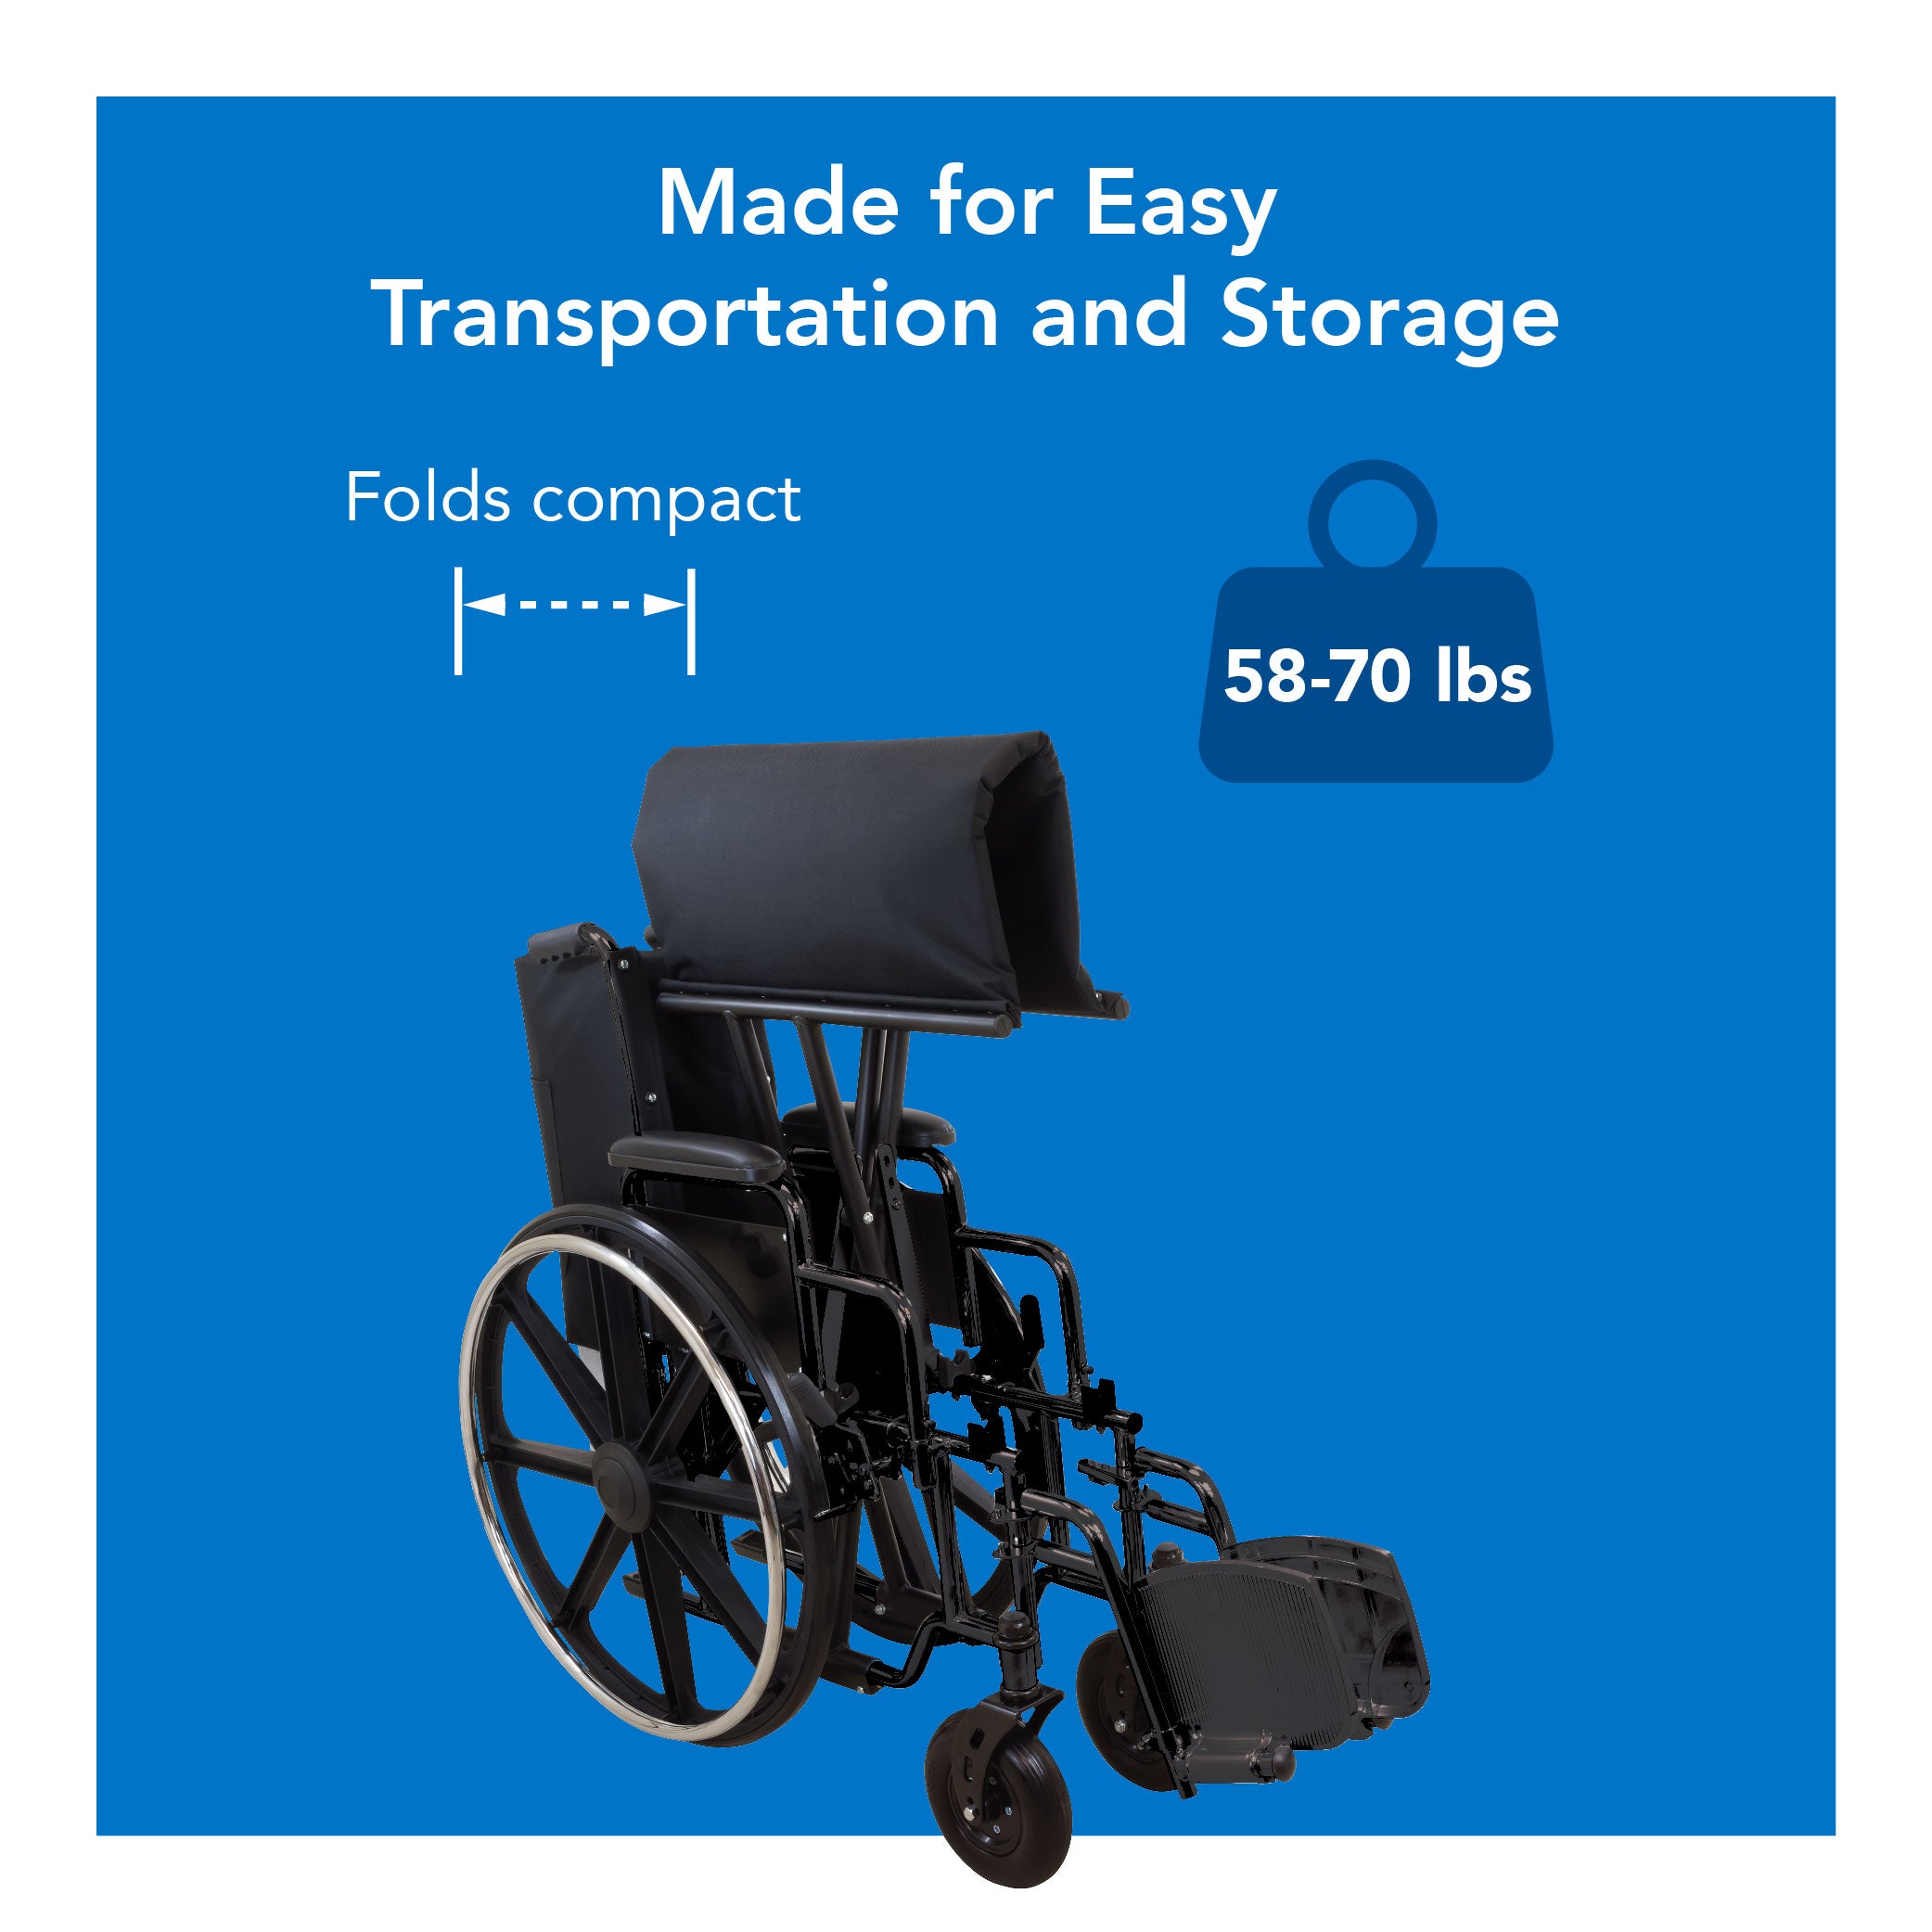 Maneuverable Narrow Wheelchair for Daily Living 21.5 wide